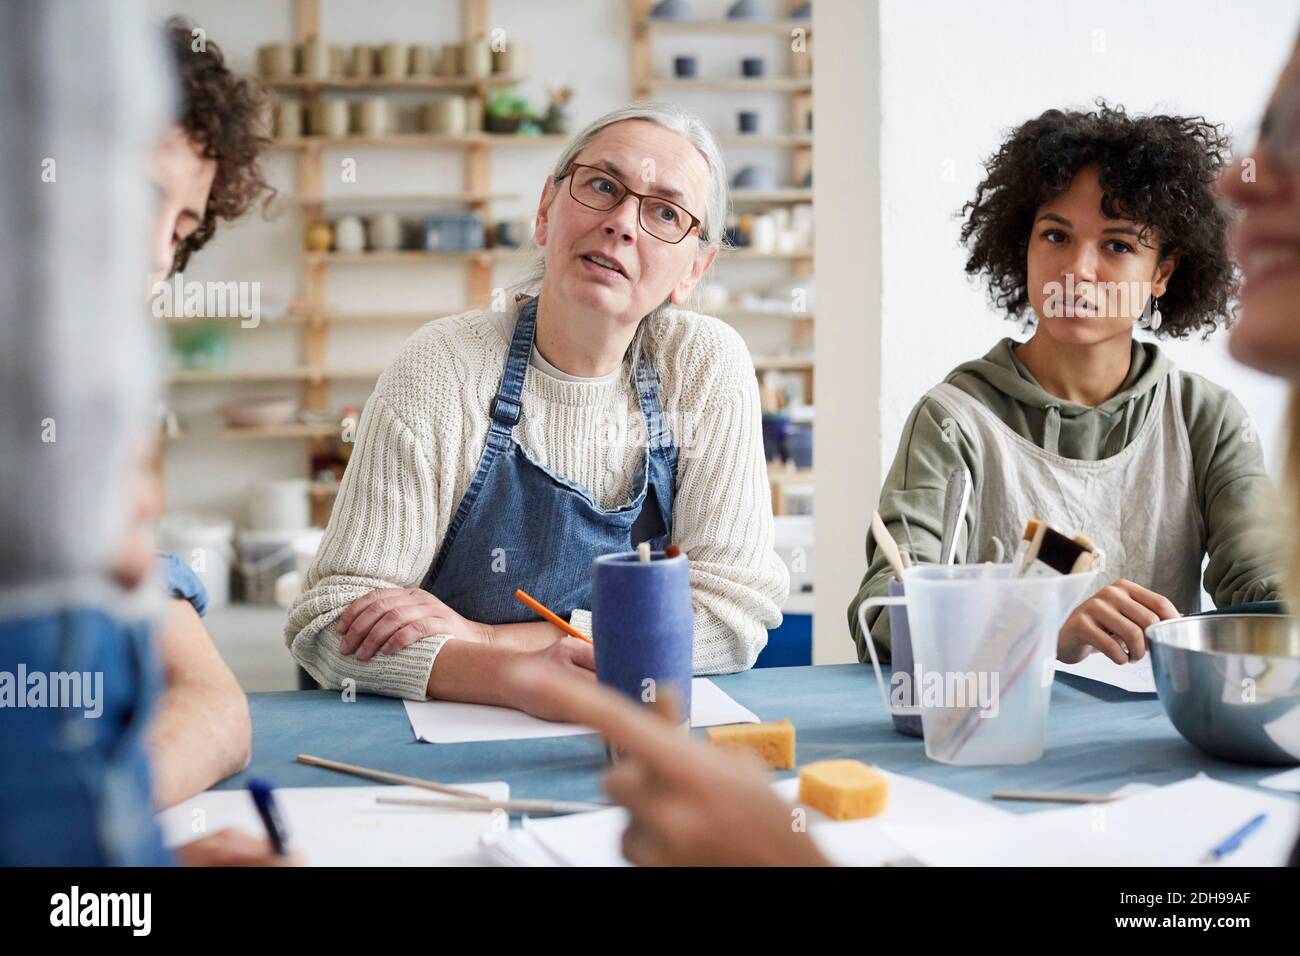 Female students listening sitting at table in art class Stock Photo